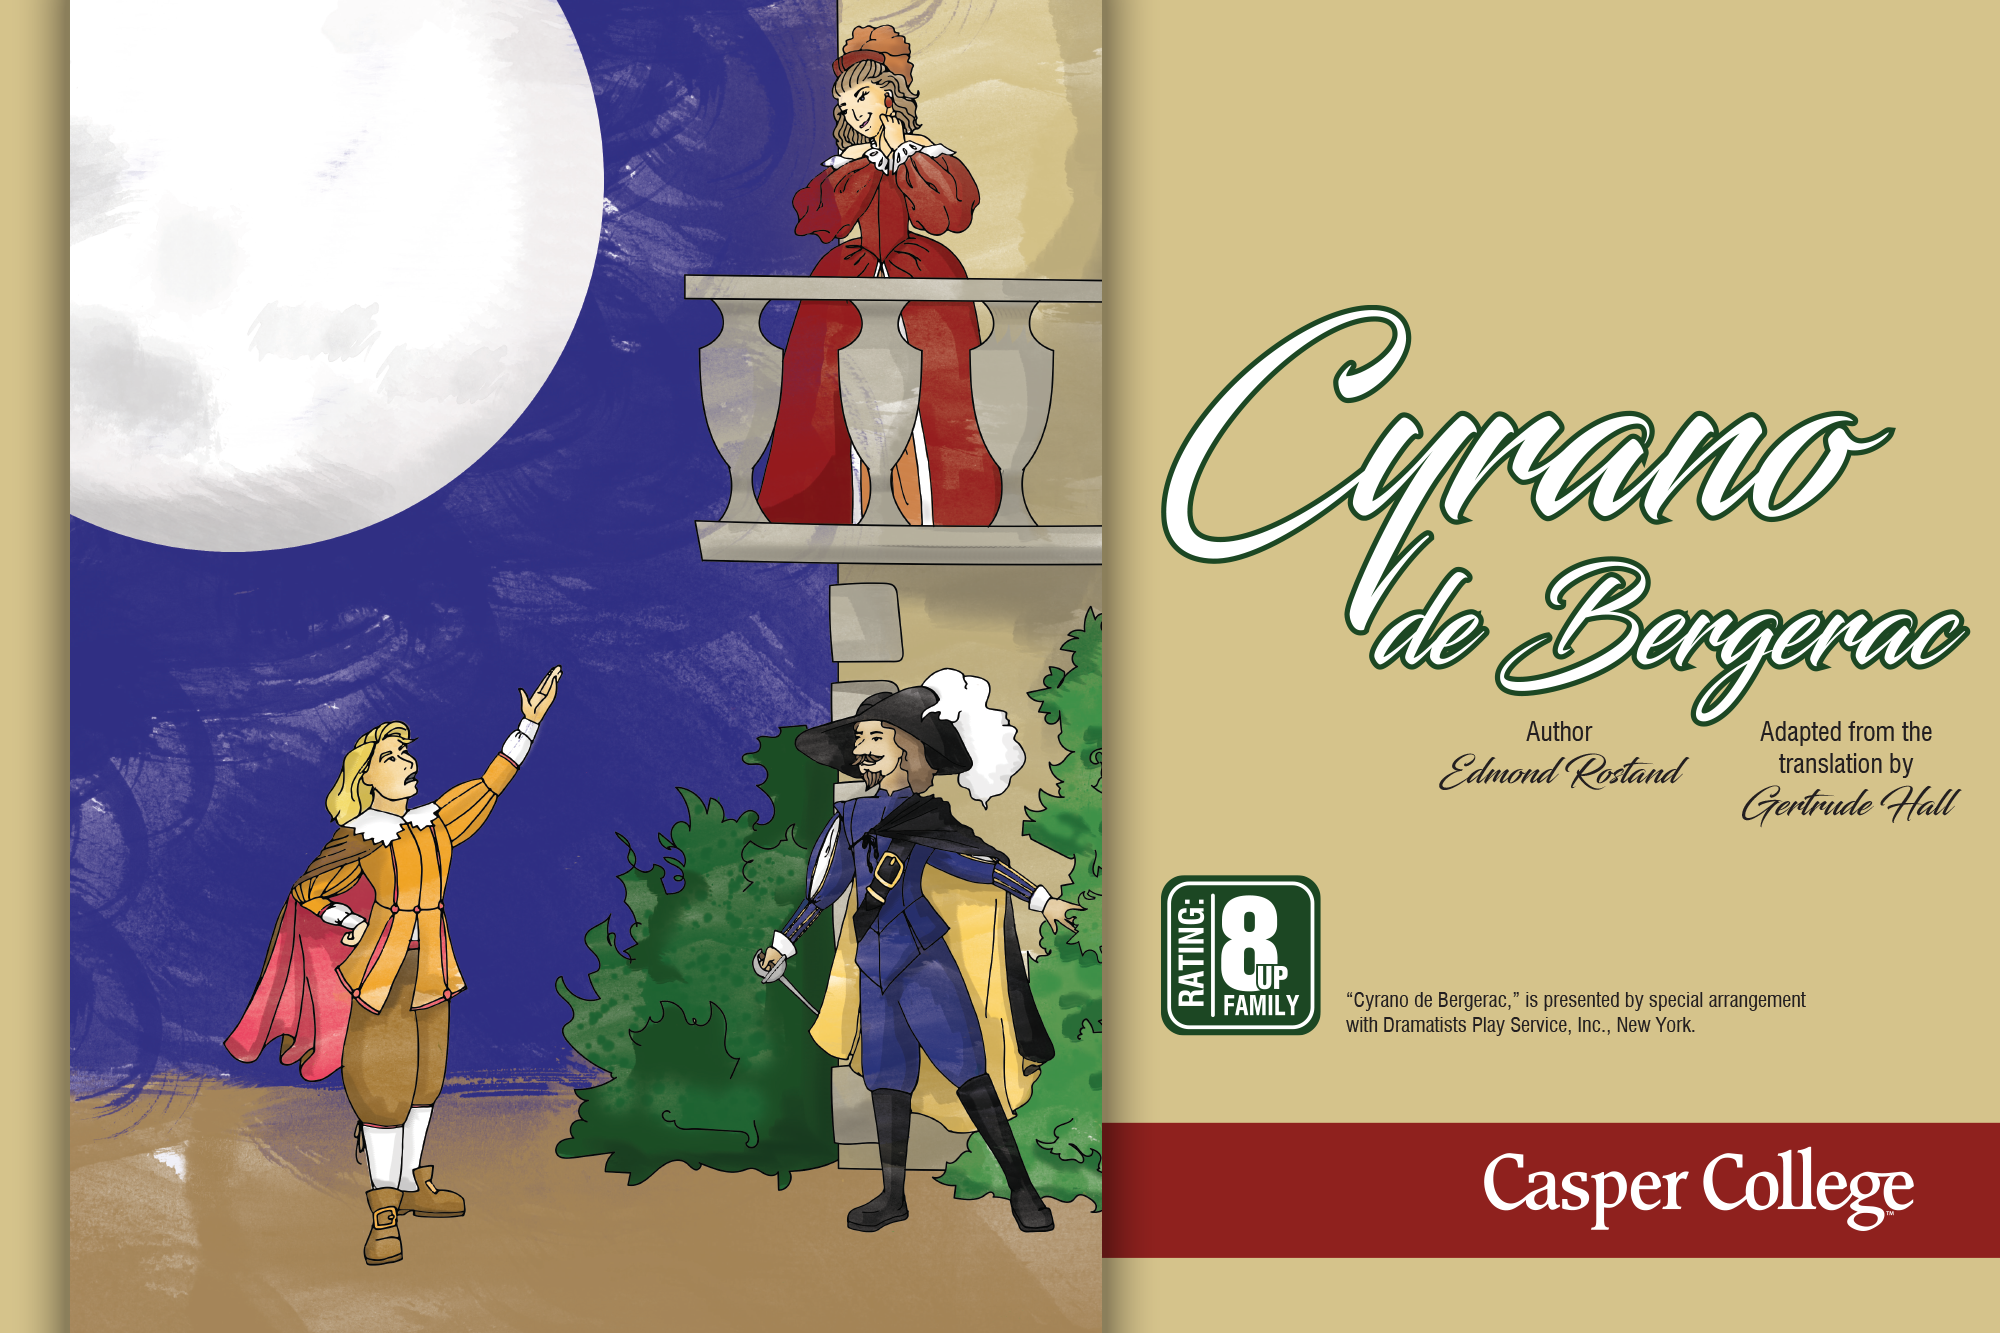 Tickets for “Cyrano de Bergerac” are now on sale.